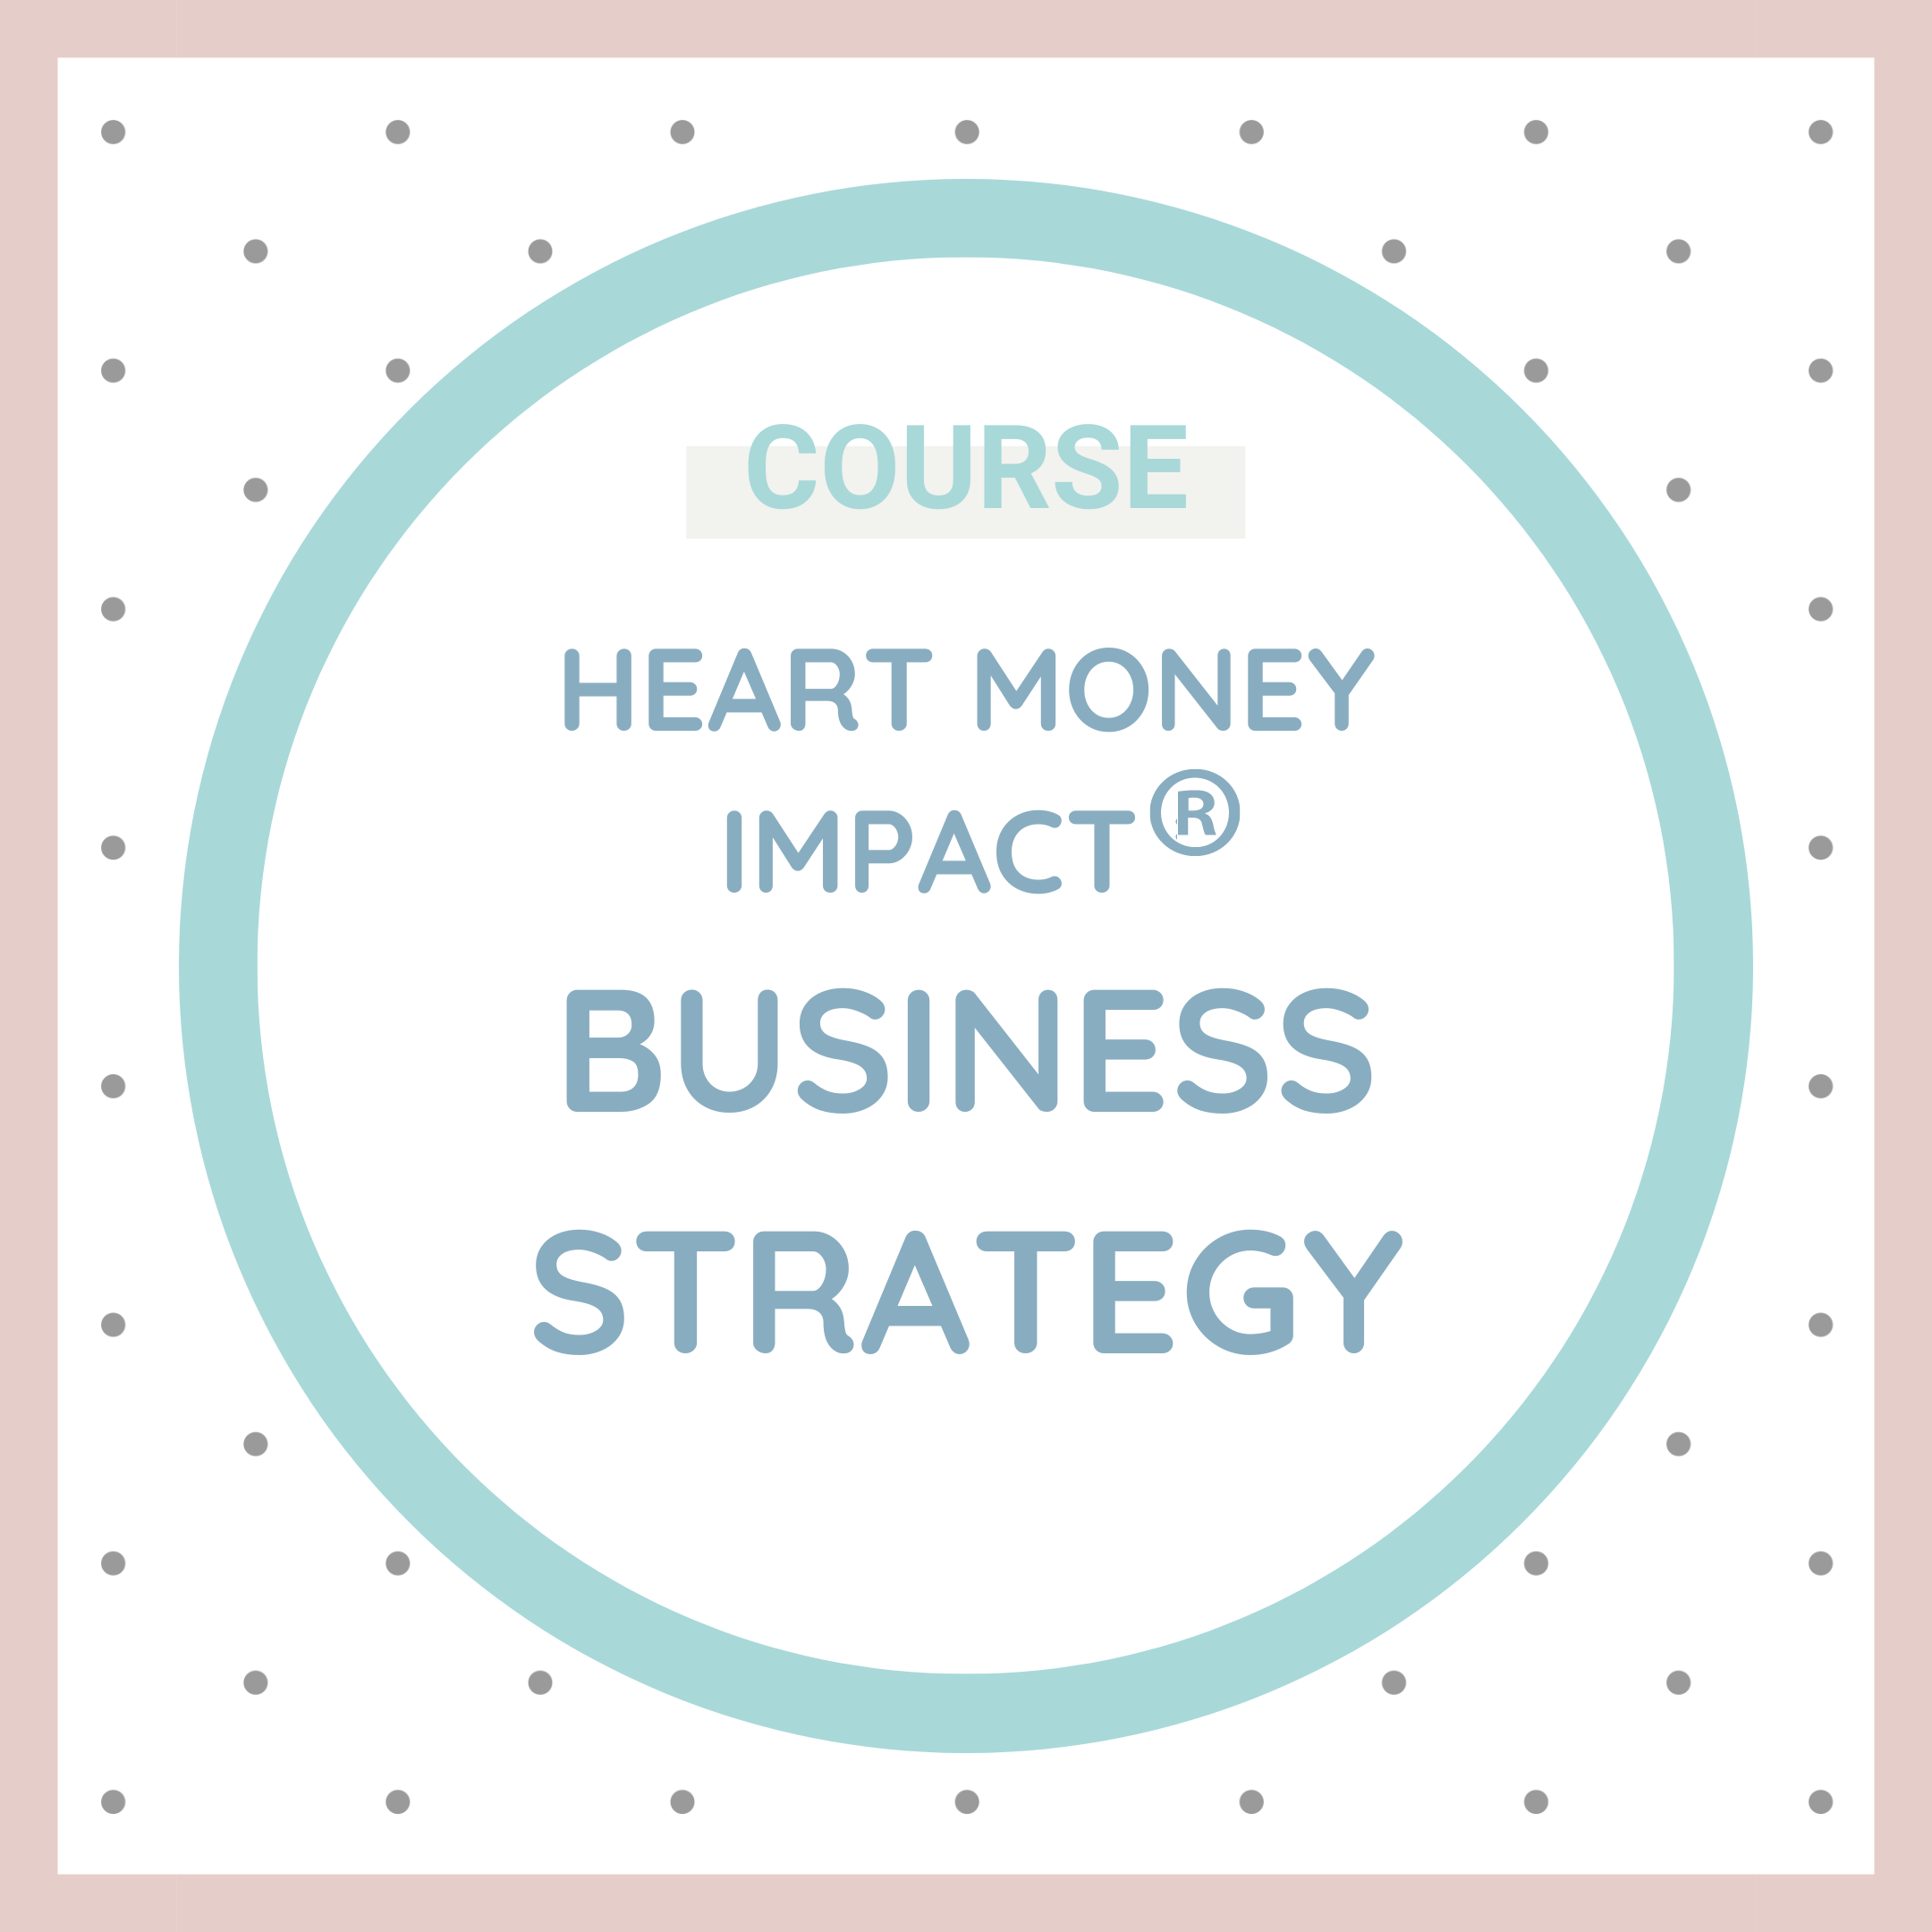 Heart Money Impact Business Strategy Course